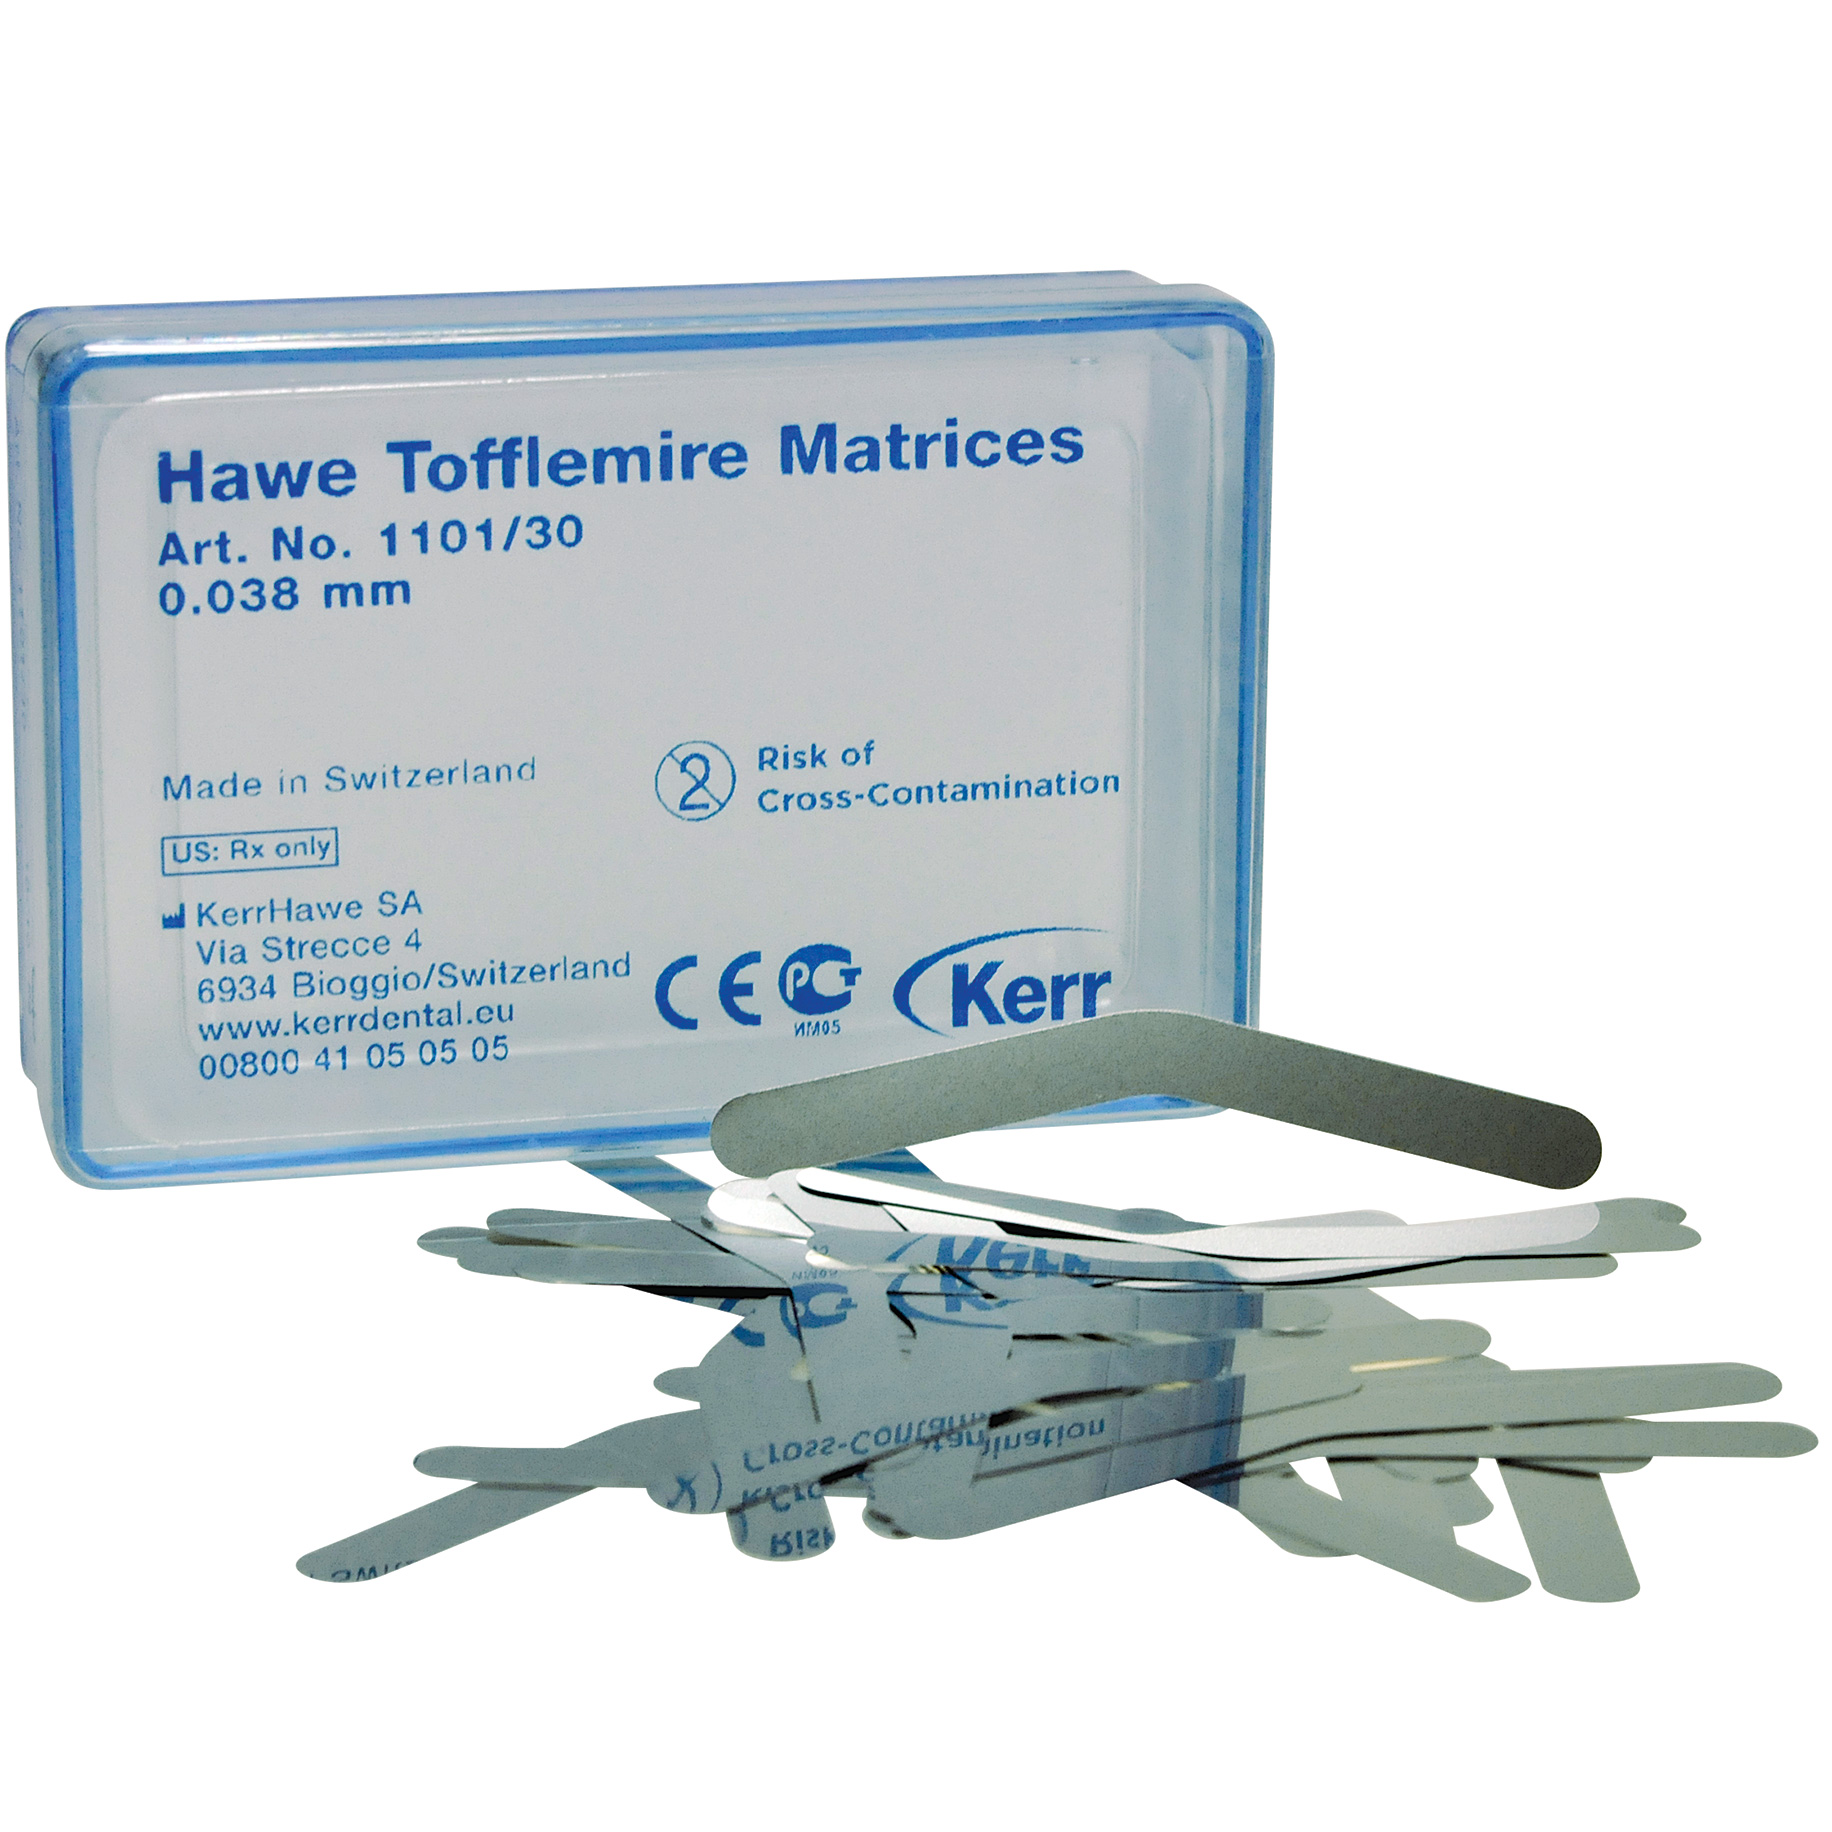 Tofflemire Contoured Matrices 0.038mm thin 